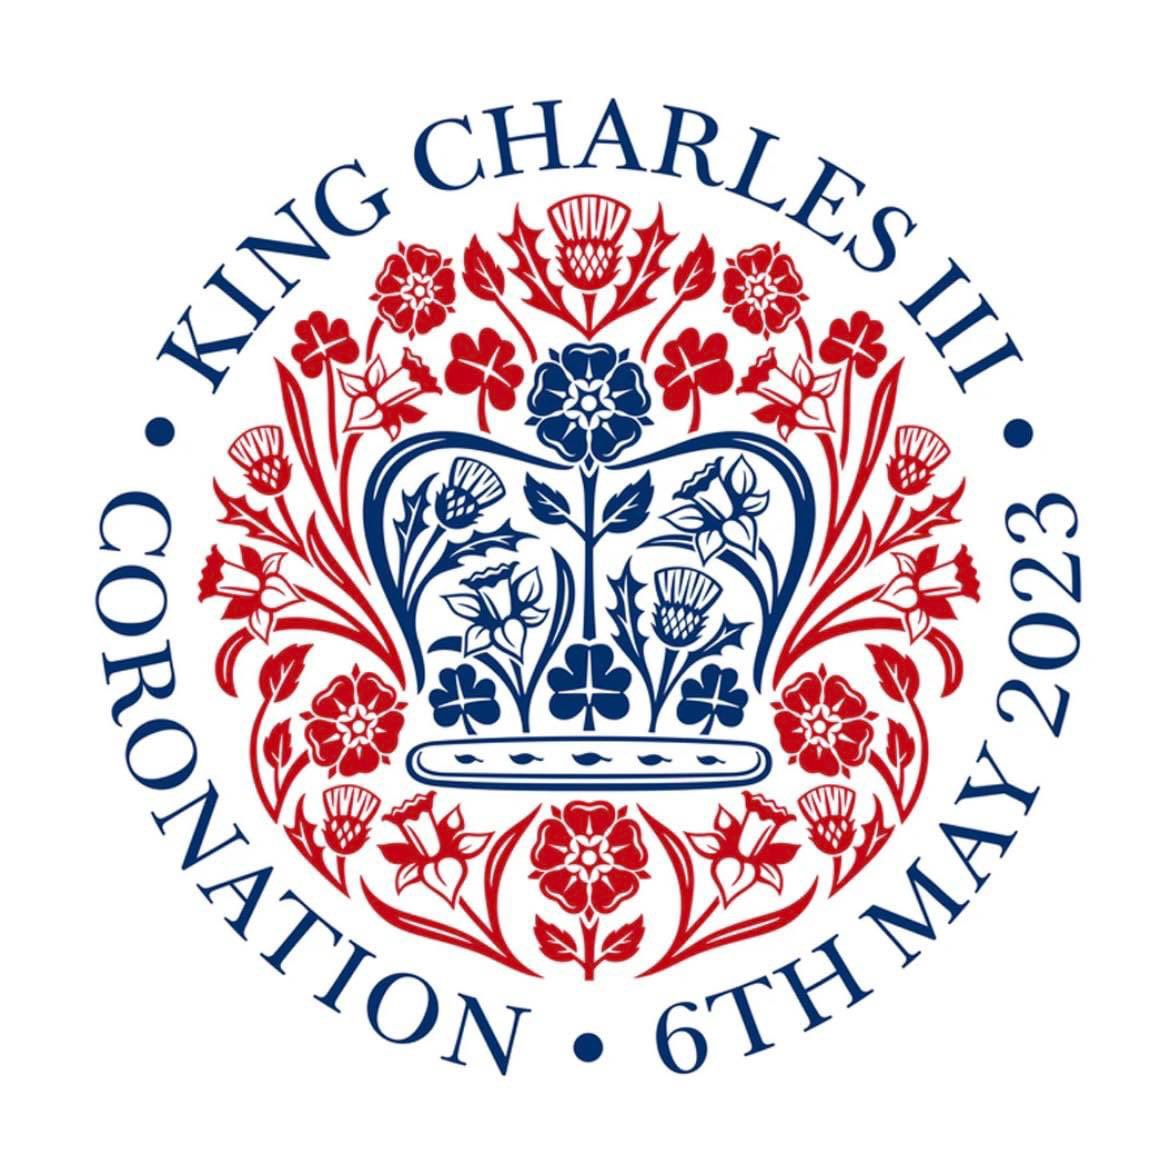 Today marks the celebration of the Coronation of The King and The Queen Consort. We hope you all enjoy your celebrations and have a lovely weekend ❤️🤍💙